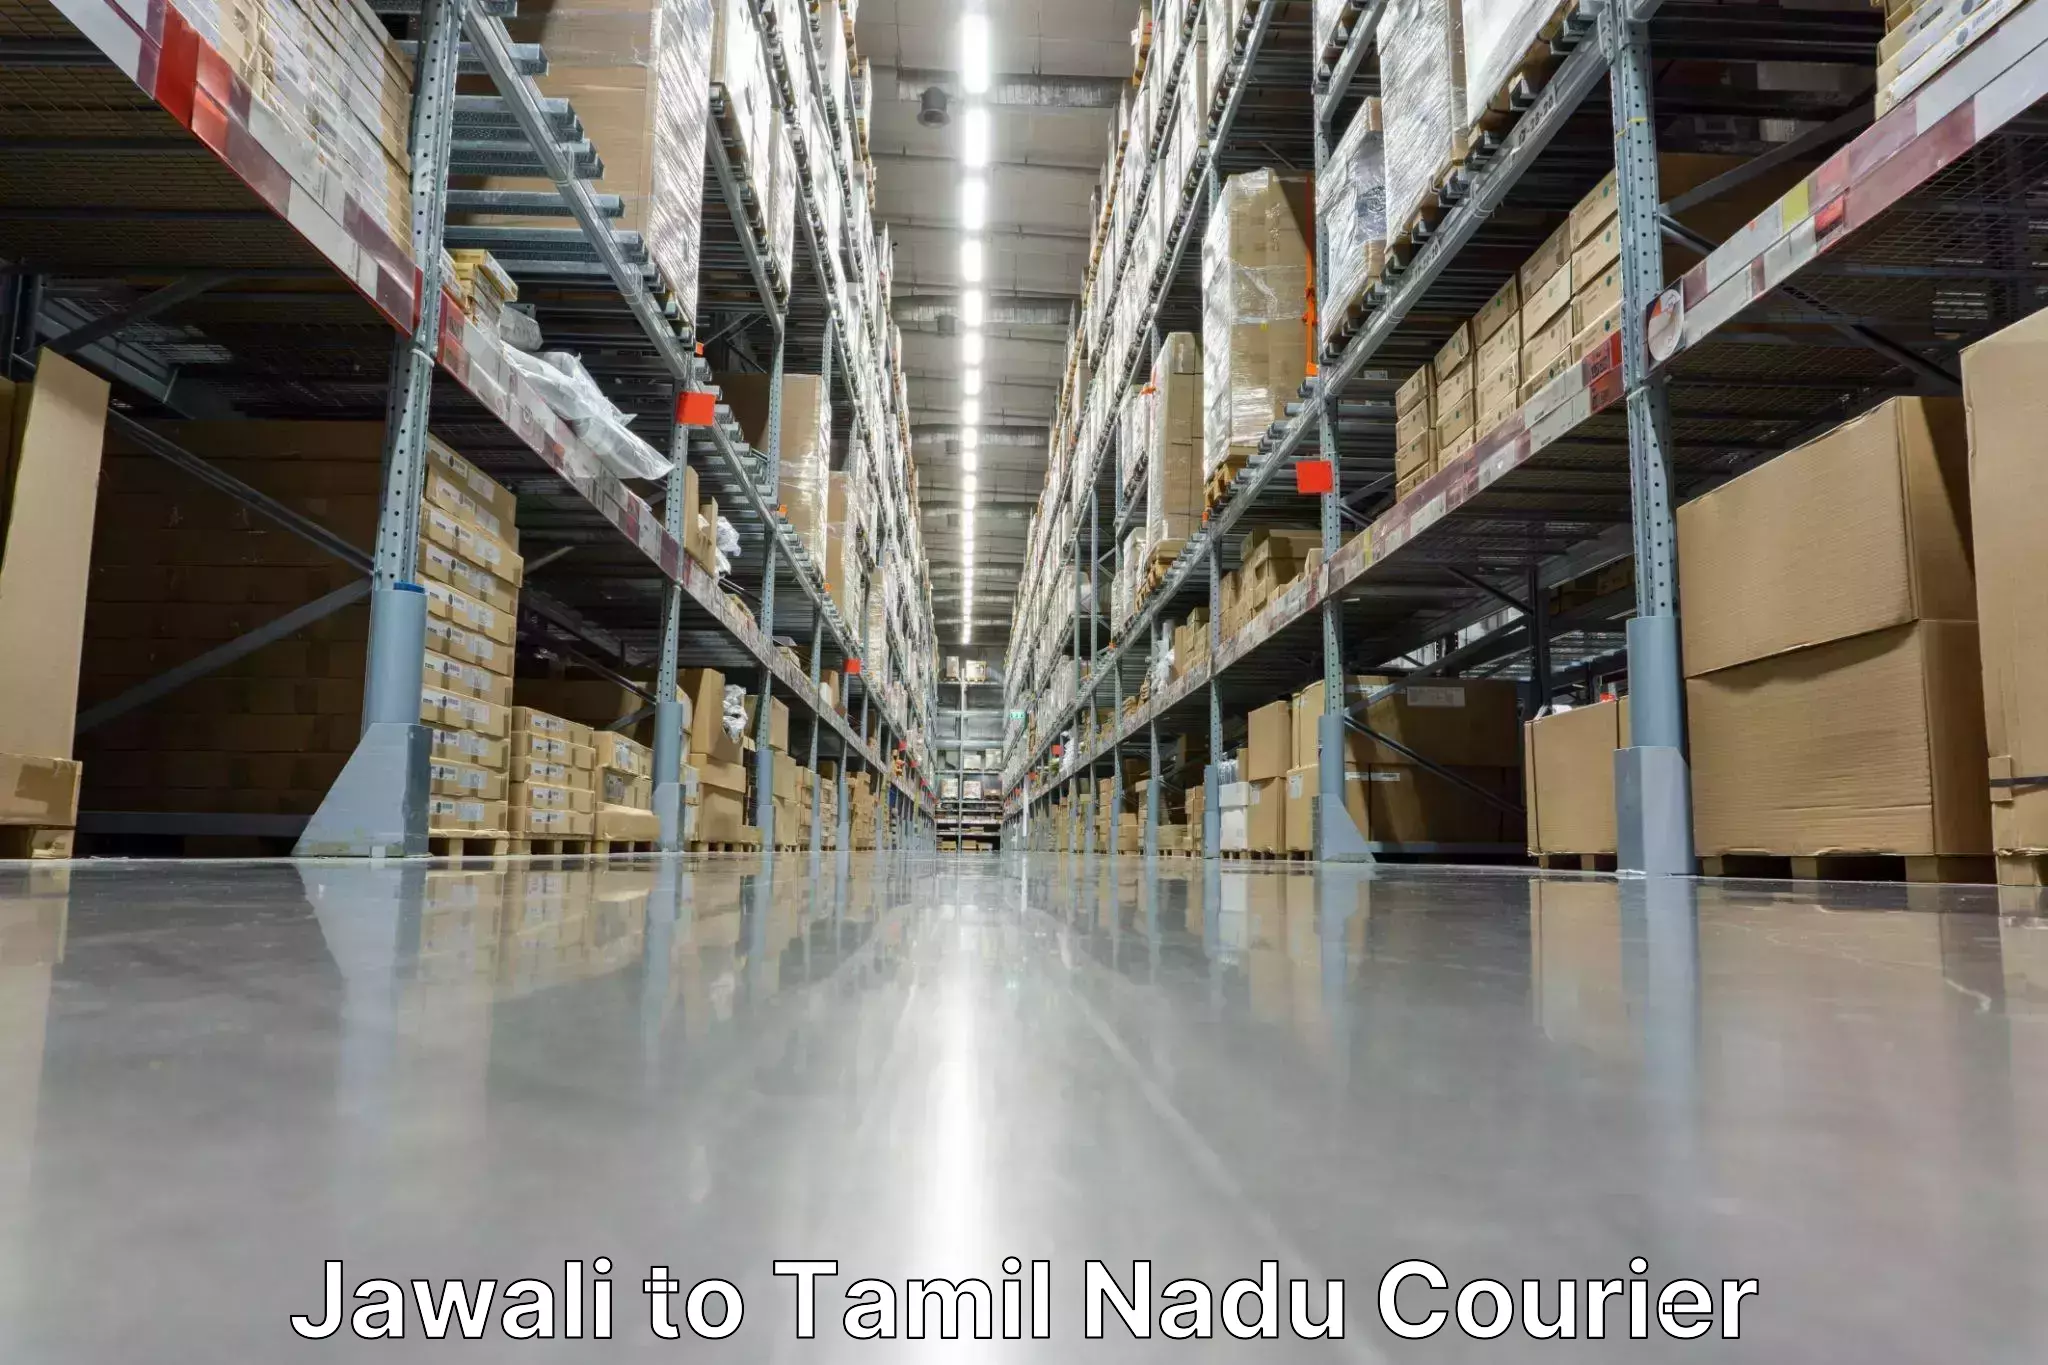 Reliable courier service Jawali to Ennore Port Chennai